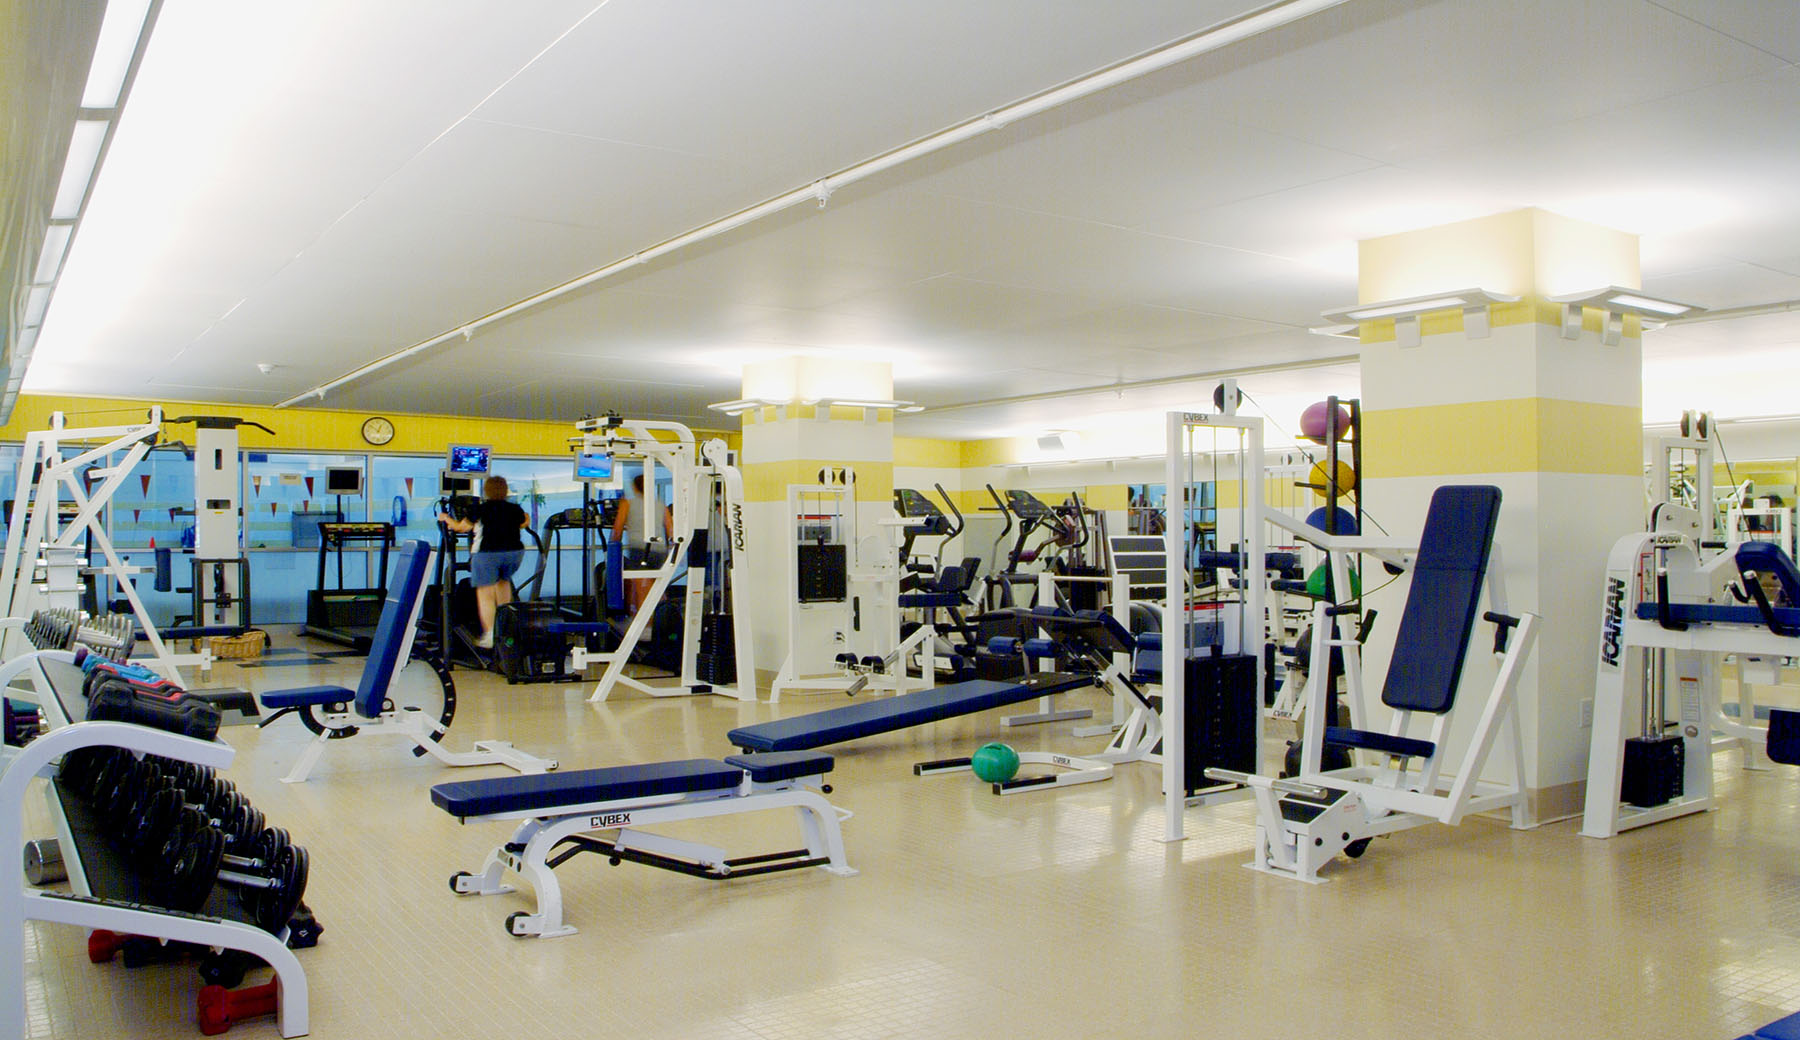 View of Fitness Room.